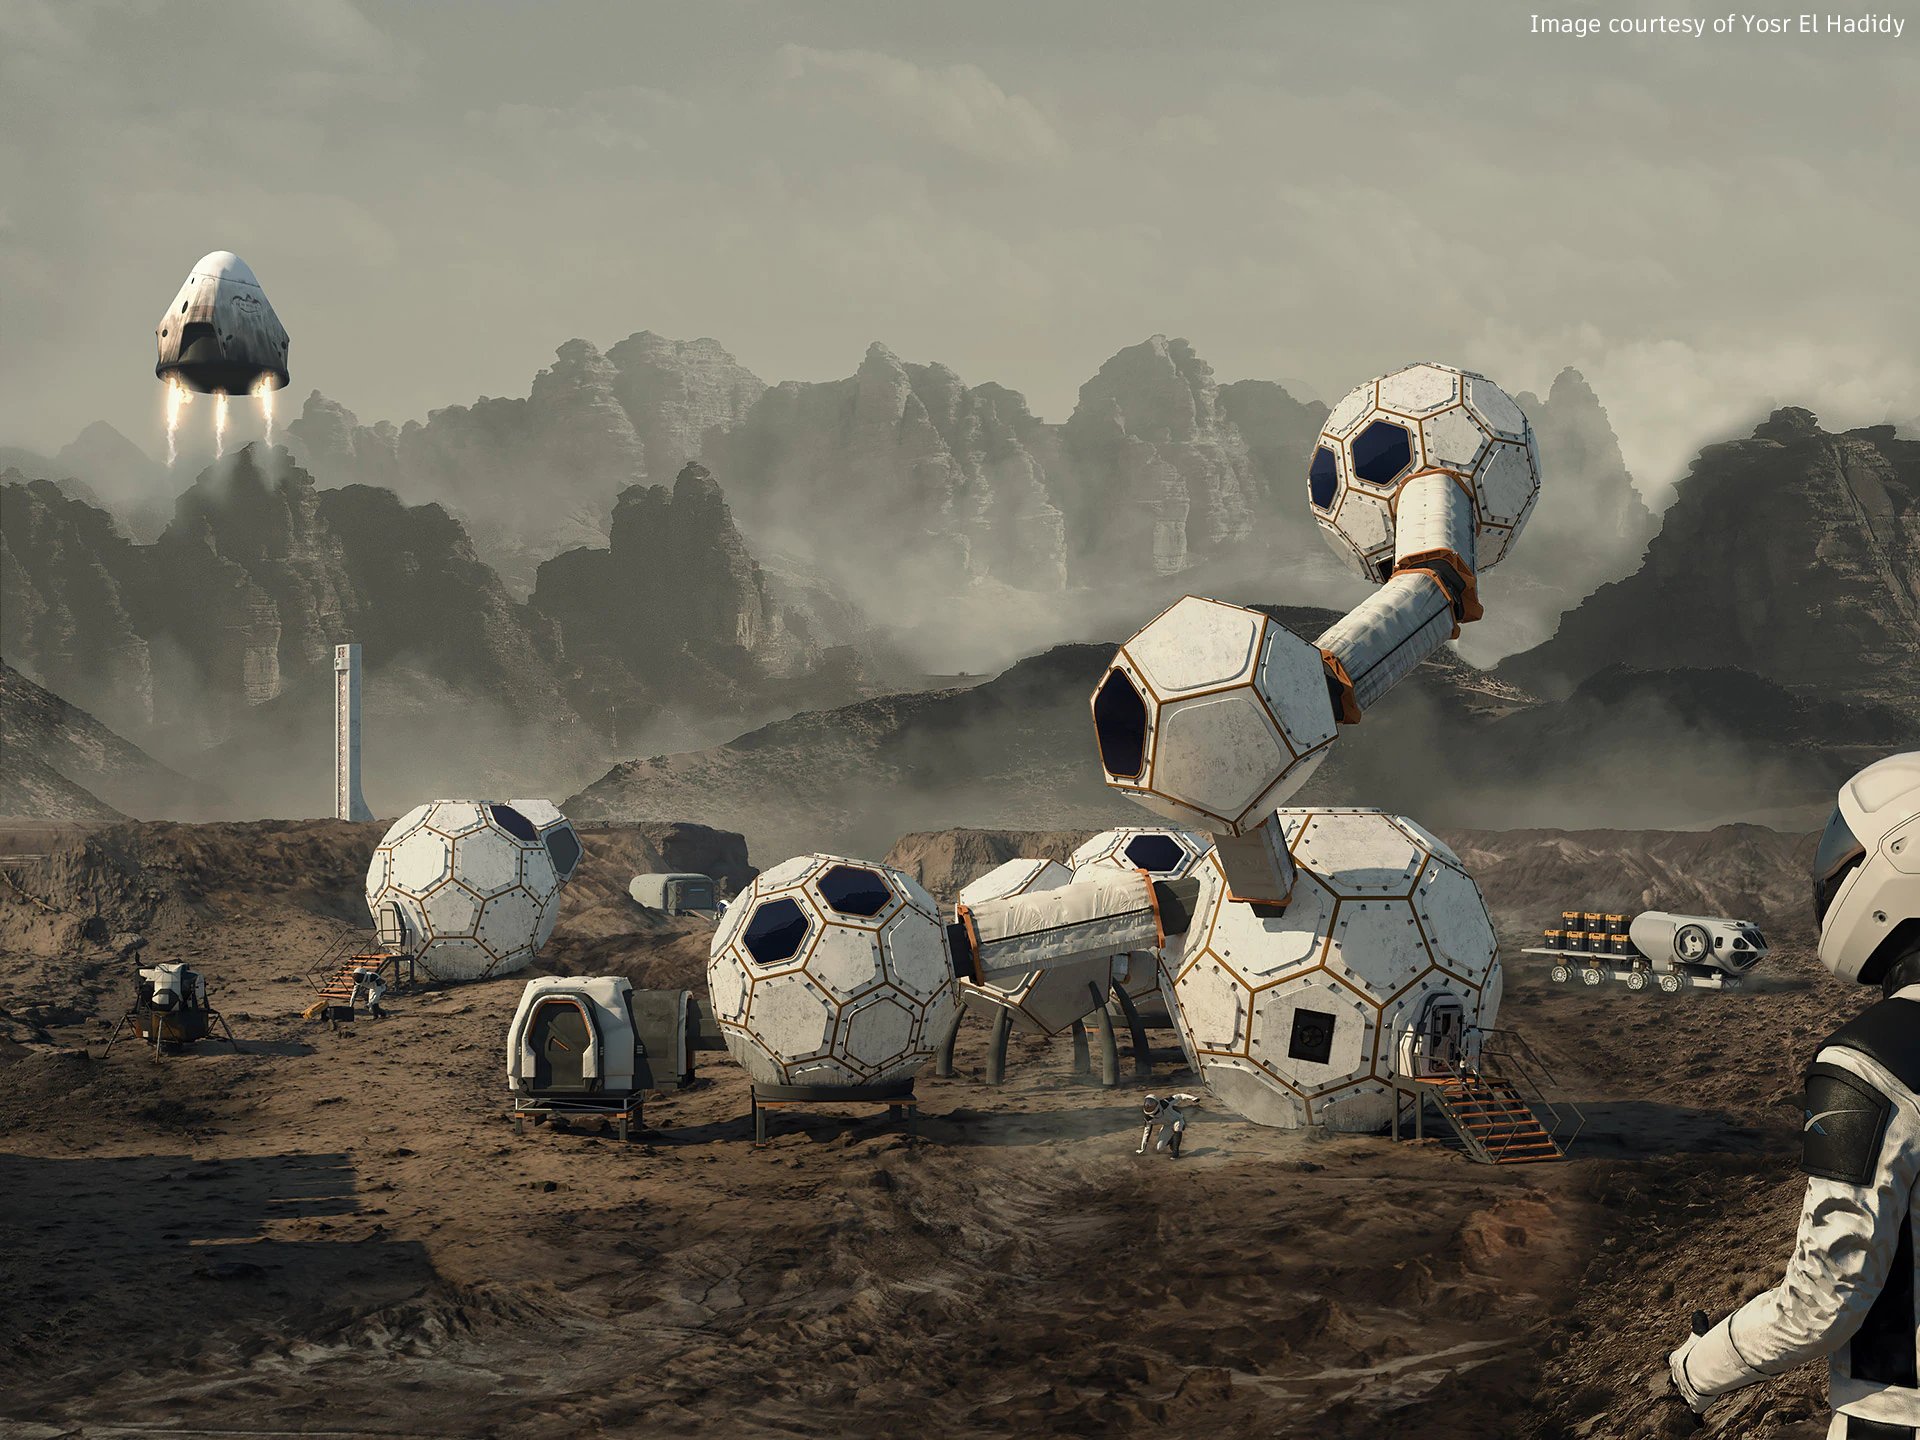 3ds Max architectural visualisation of a space centre built on the rugged terrain of a planet